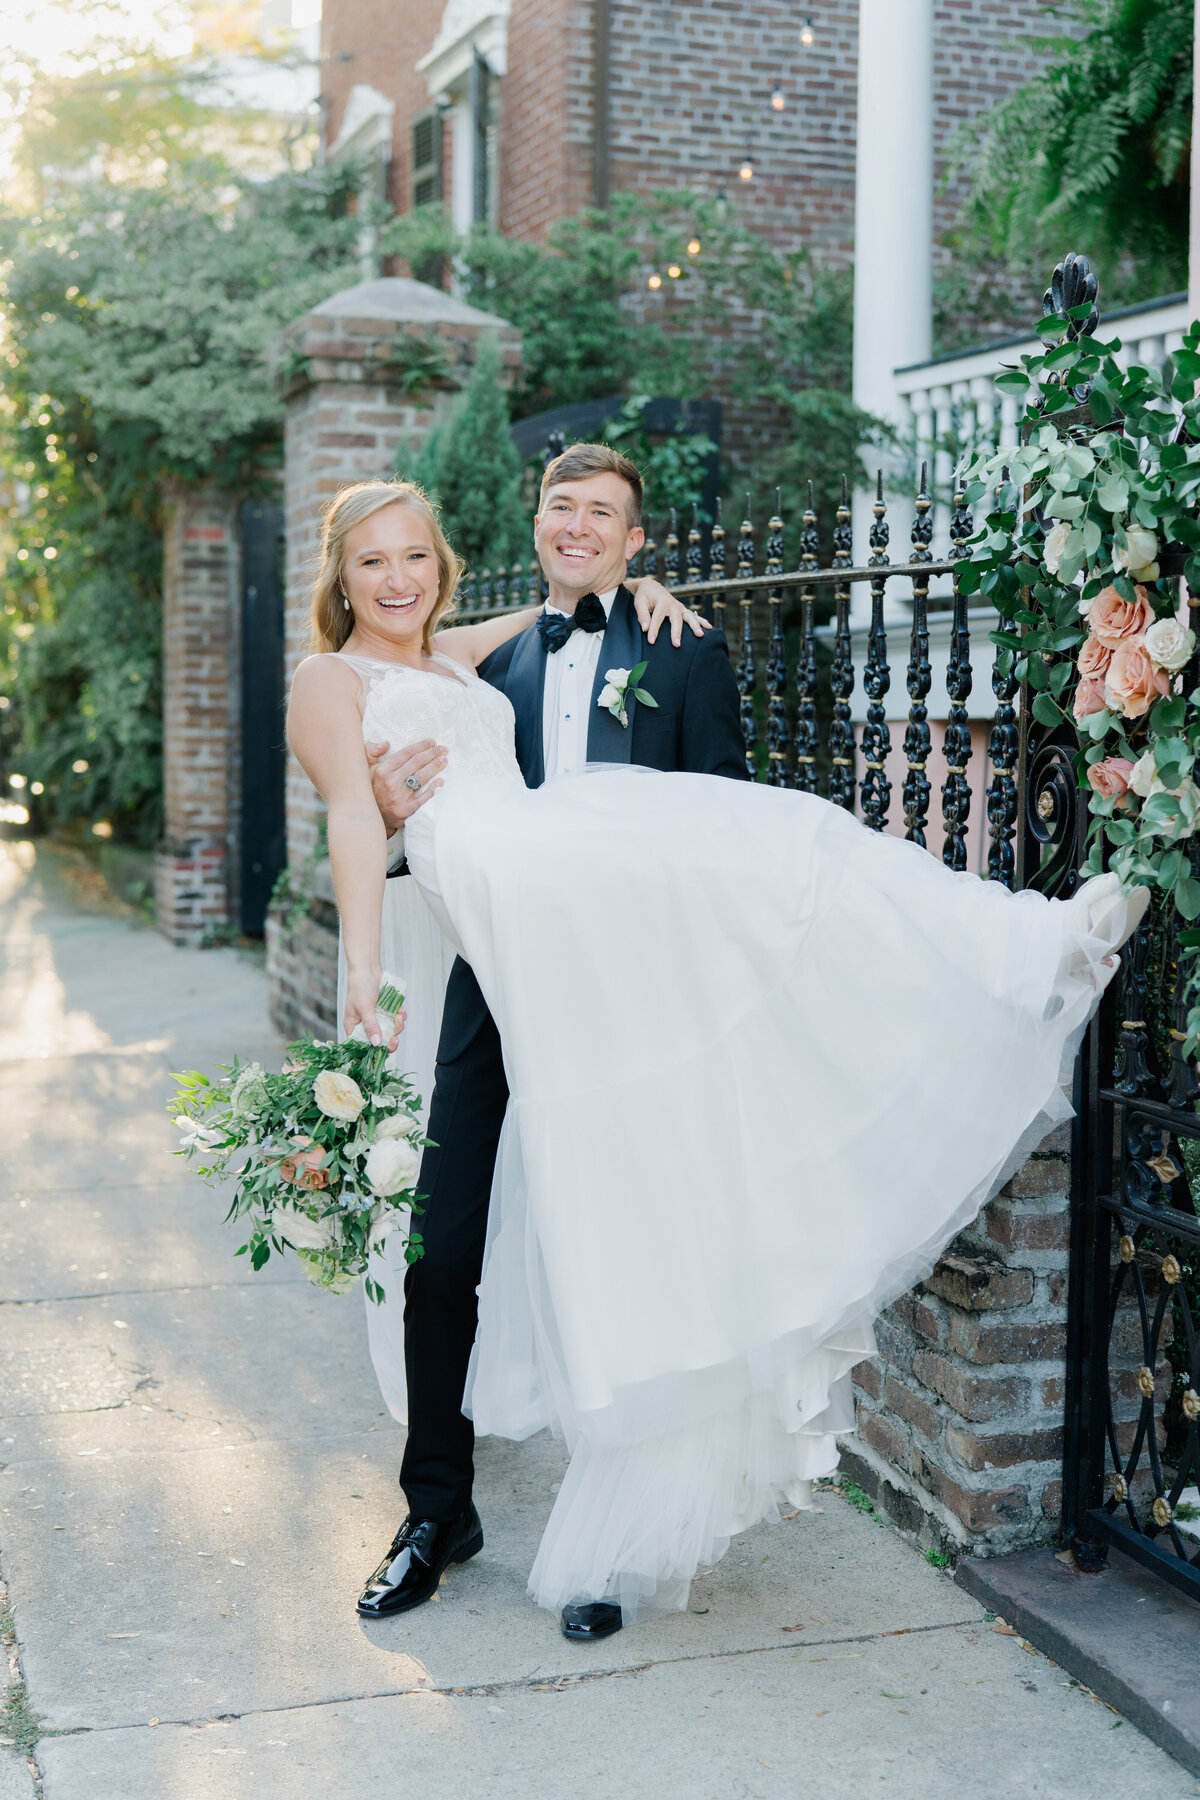 Parsonage_House_Intimate_Fall_Charleston_Wedding_Small_Guest_Count_Kailee_DiMeglio_Photography_Destination_Wedding_Photographer-1001